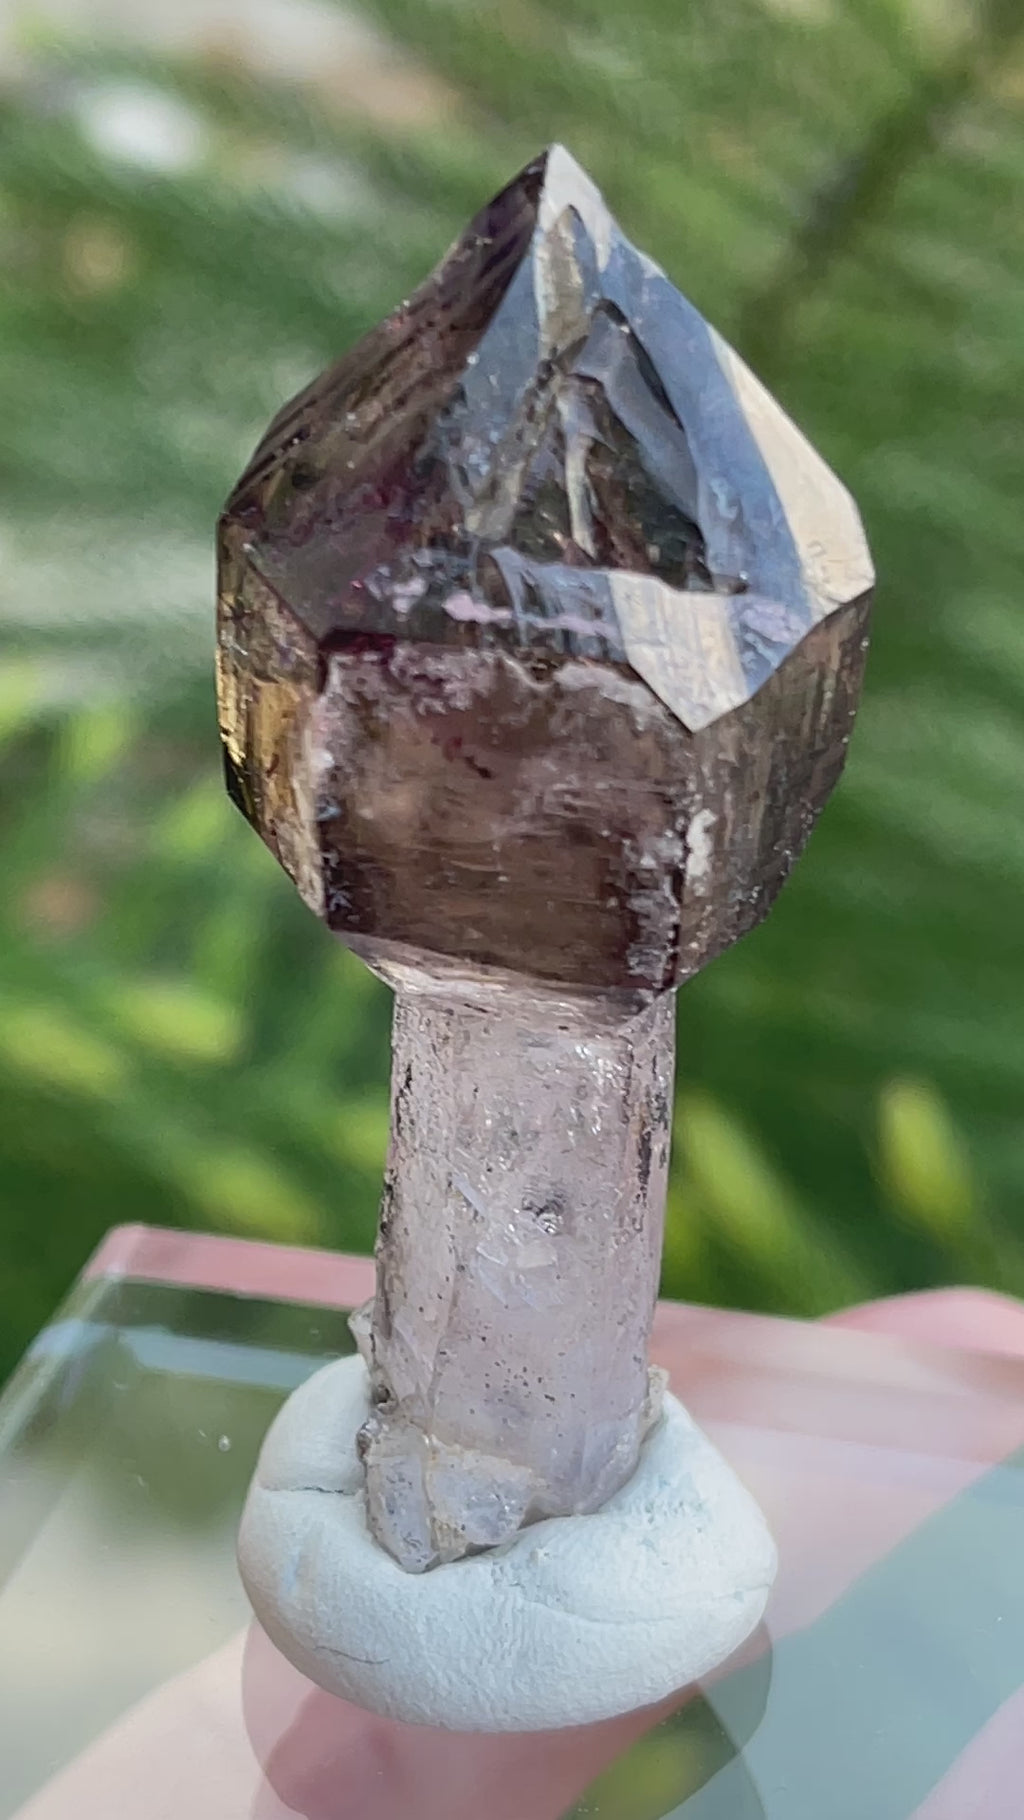 No damage or polish. The complex grown faces of this Smoky Quartz Scepter specimen are not broken, rather they exhibit dimples and indented fenster or skeletal, hoppered growth.